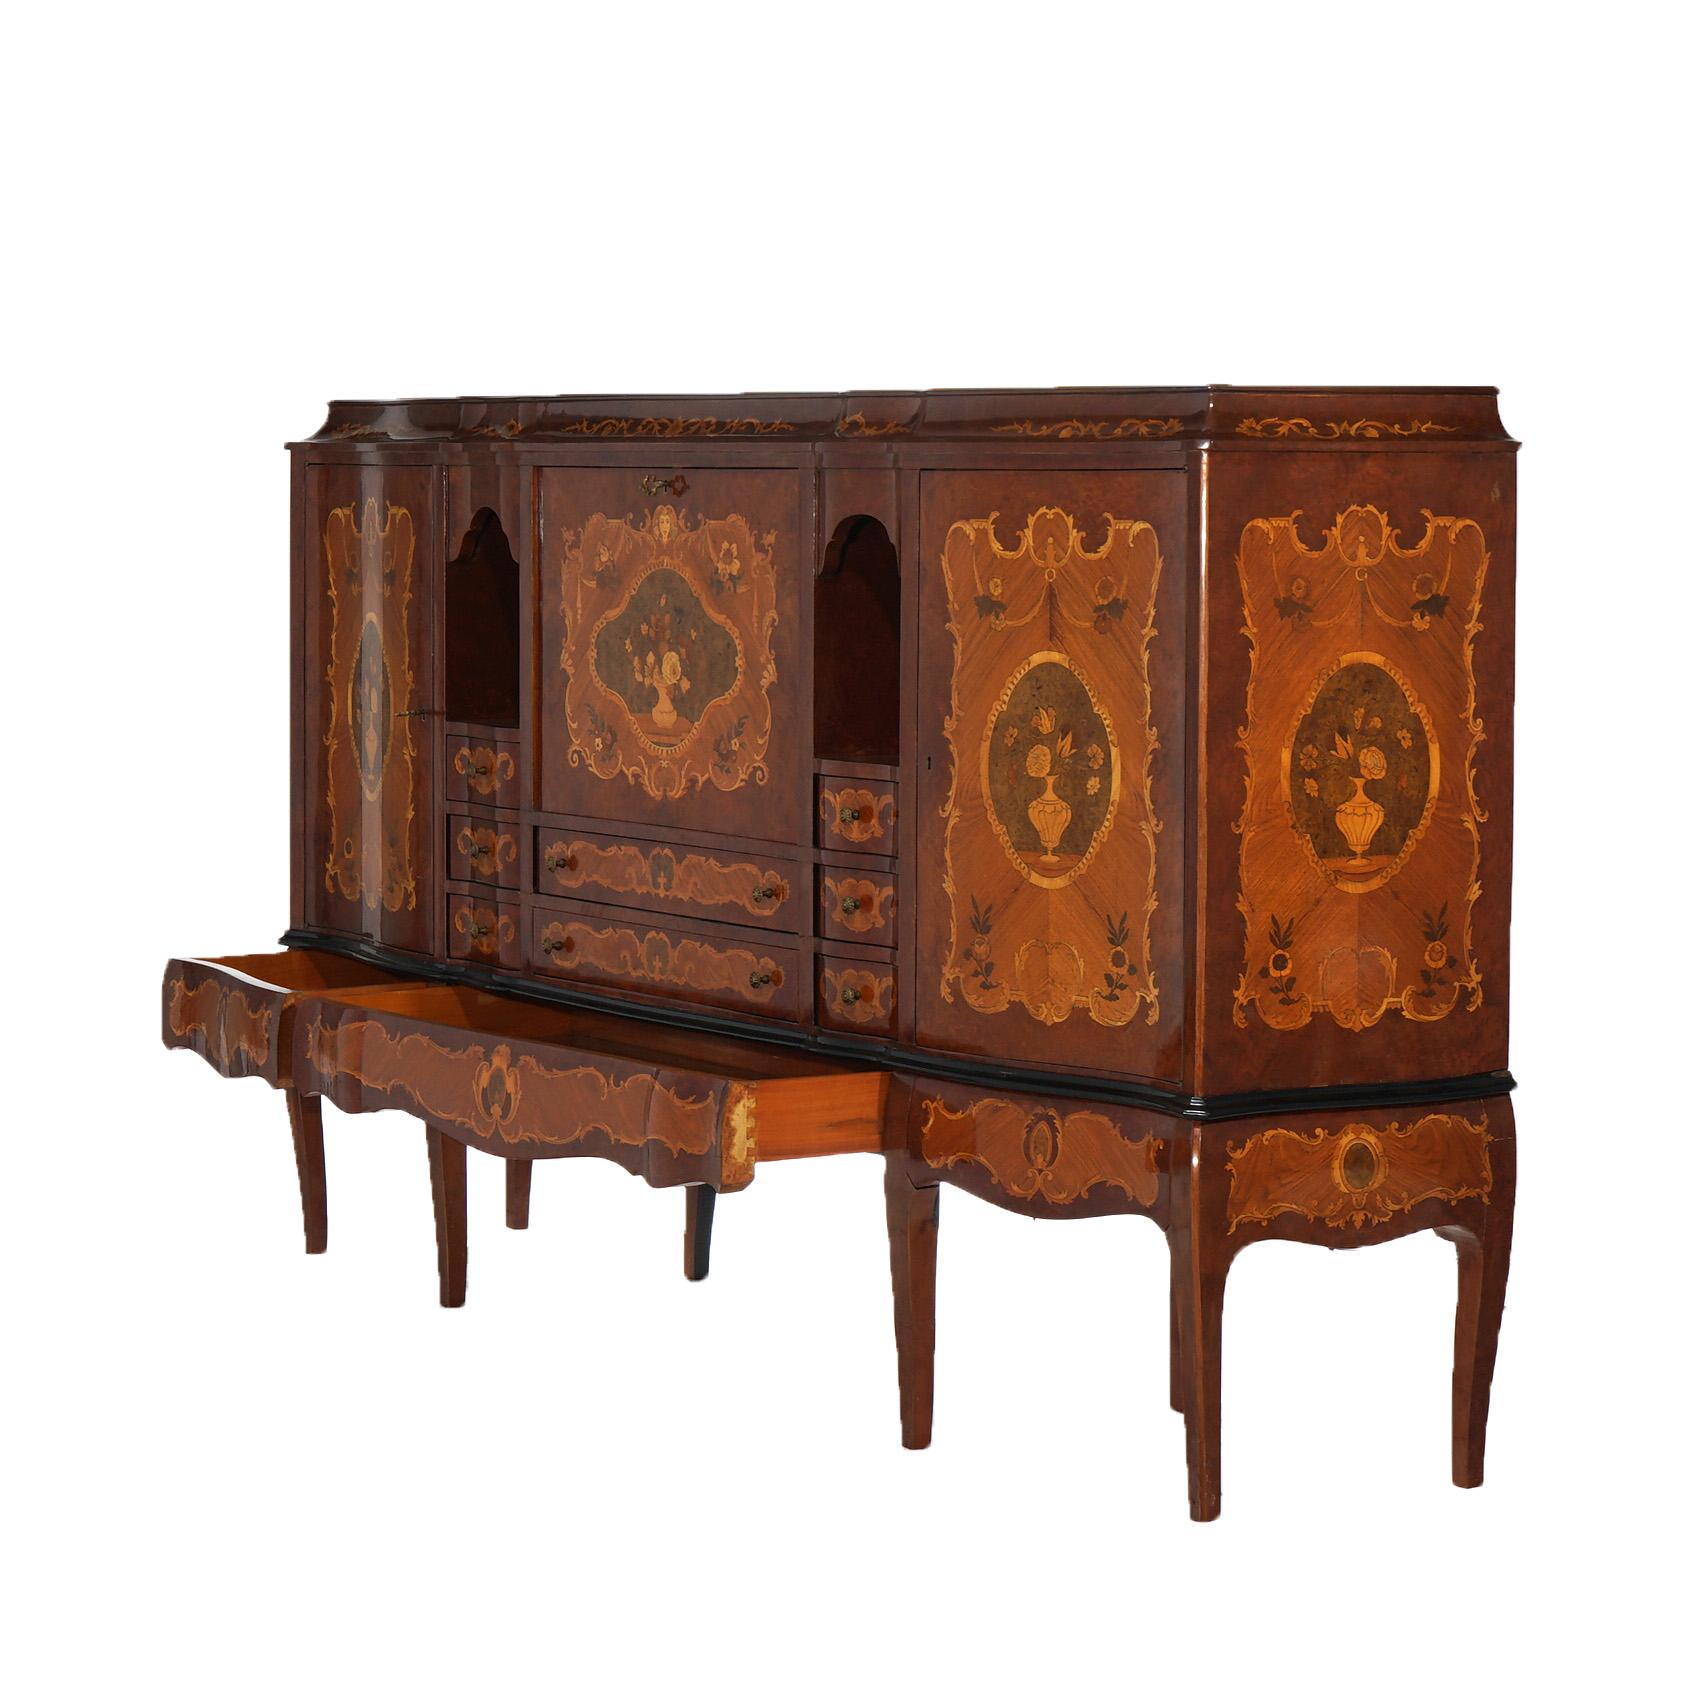 Antique French Kingwood Satinwood & Burlwood Marquetry Inlaid Sideboard C1930 For Sale 1